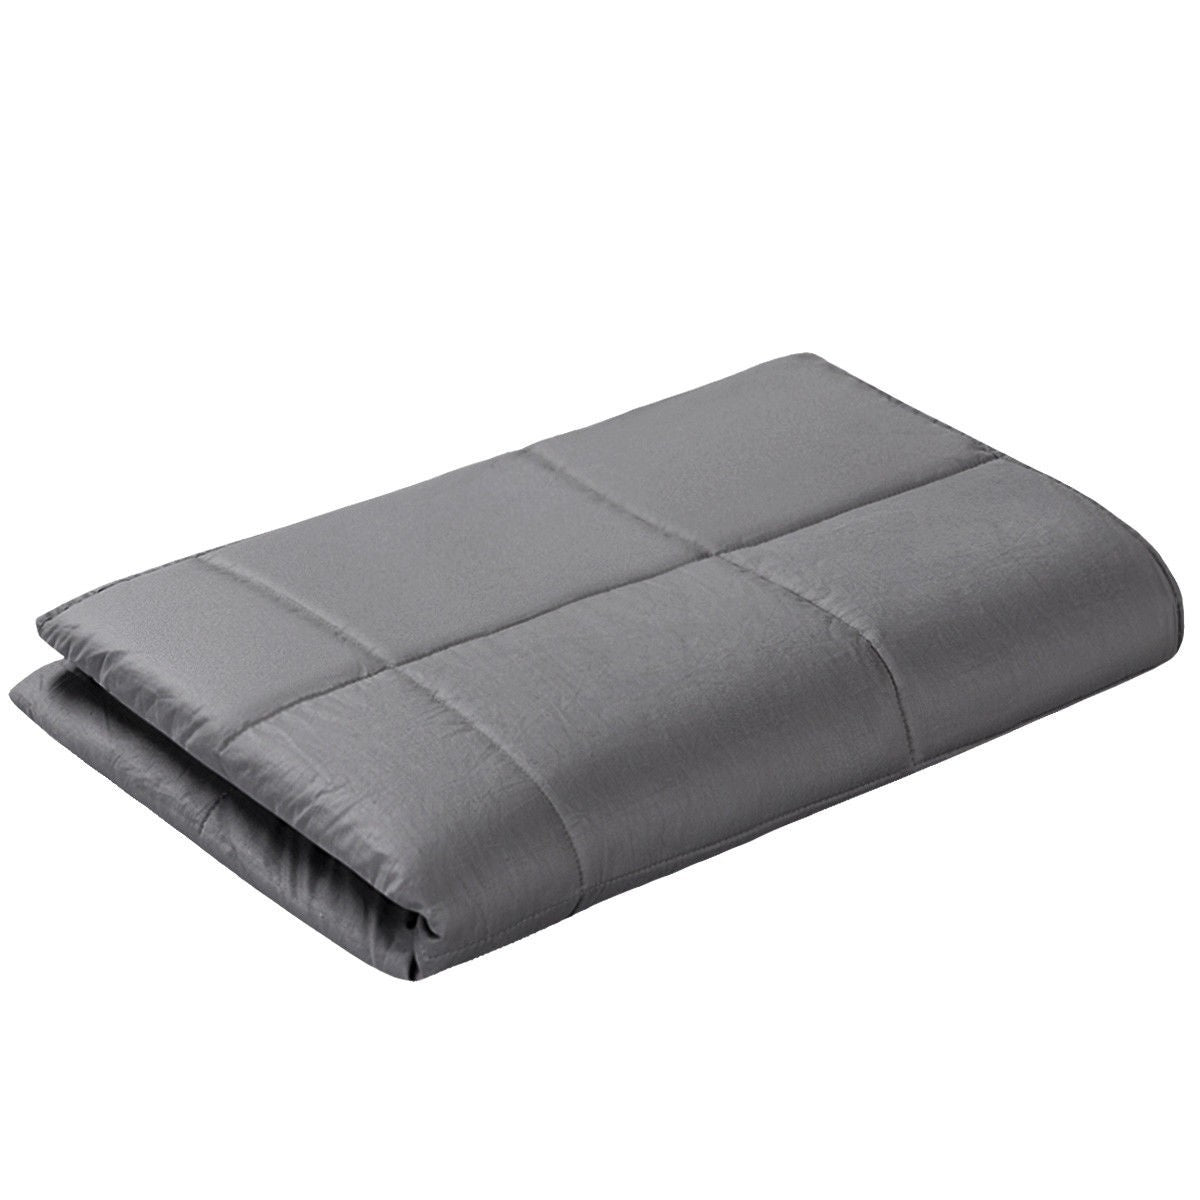 Giantex Weighted Blanket 7lbs -10lbs for Kids | 41" x 60"